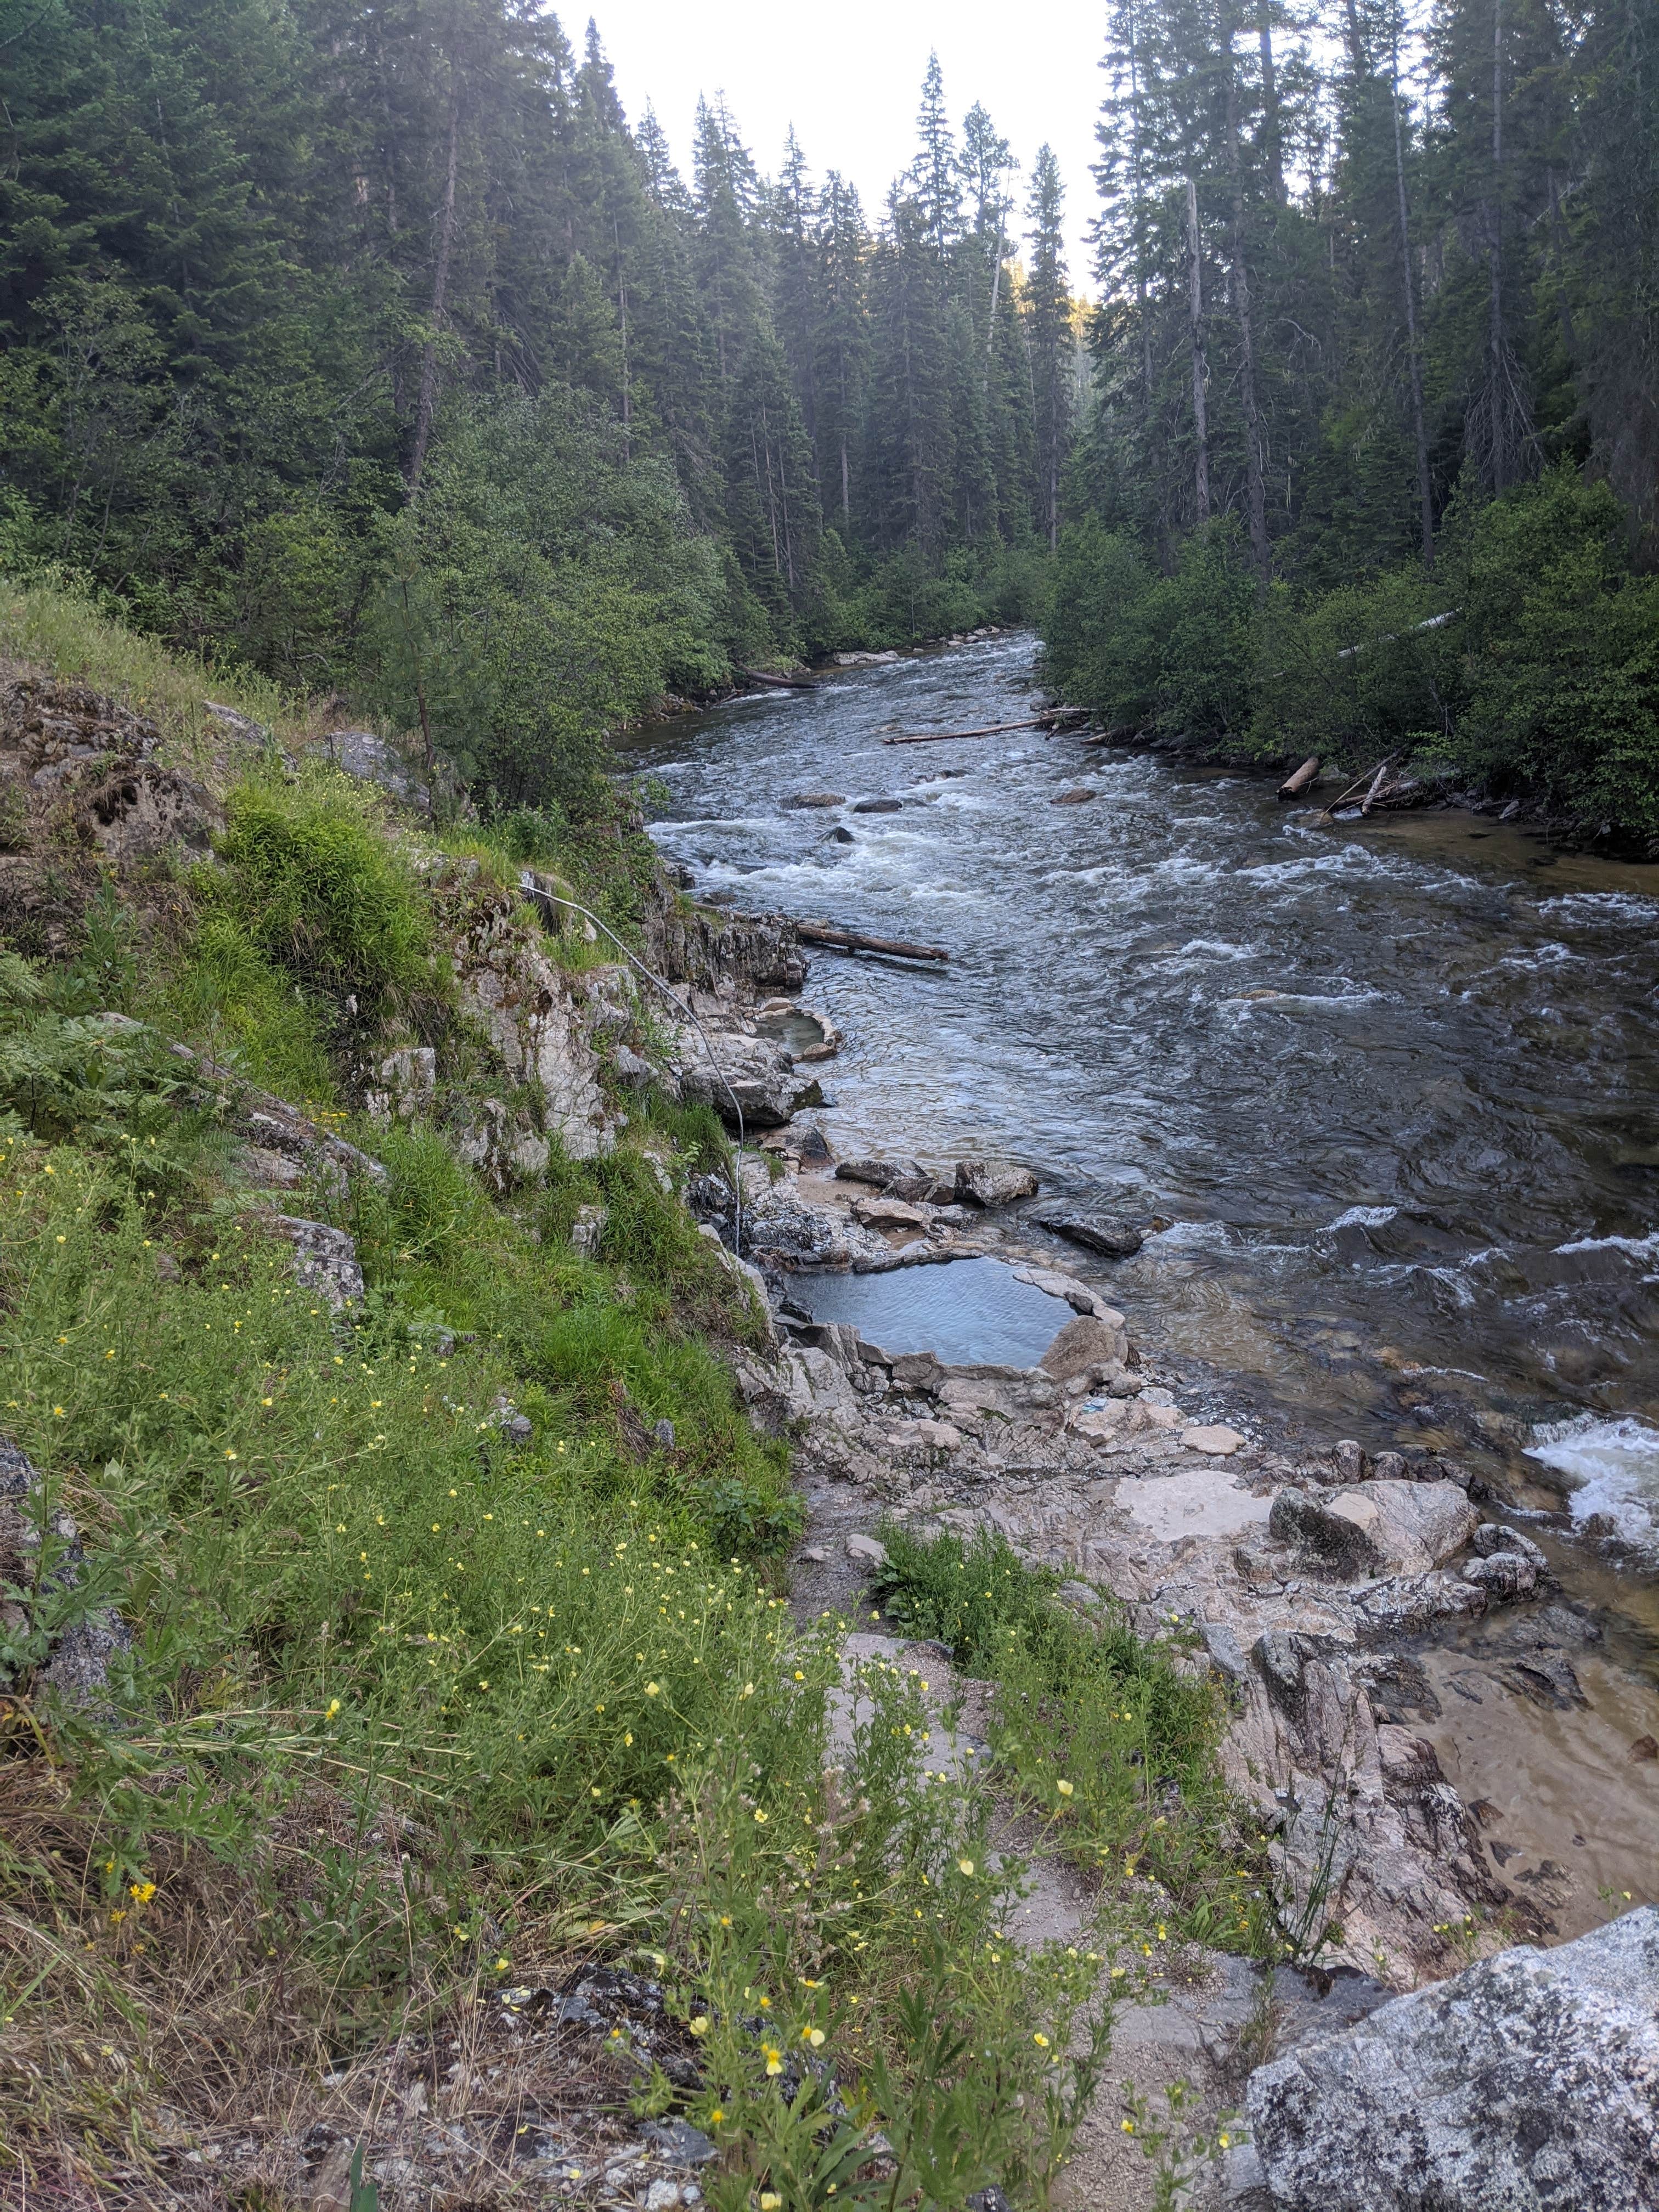 Camper submitted image from Payette National Forest Four Mile Campground - 5